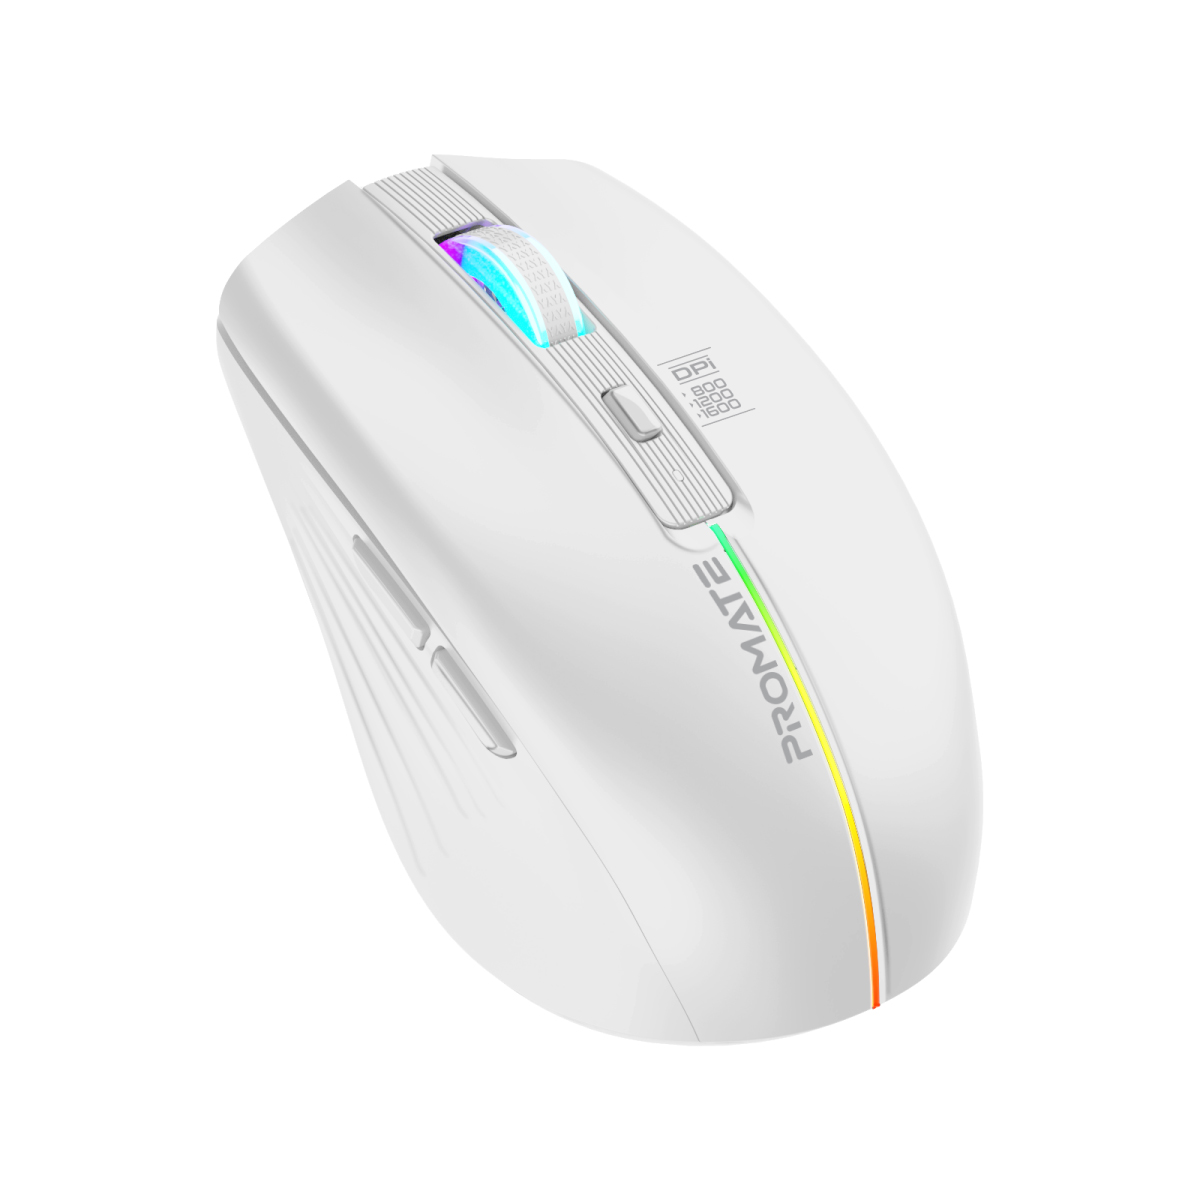 Promate Wireless Mouse, Ergonomic 500mAh Rechargeable LED Backlit Mice with Adjustable 1600DPI, 6 Functional Buttons, RGB Modes and 2.4Ghz Wireless Transmission for MacBook Air, Dell XPS 13, Asus, Kitt.WHITE